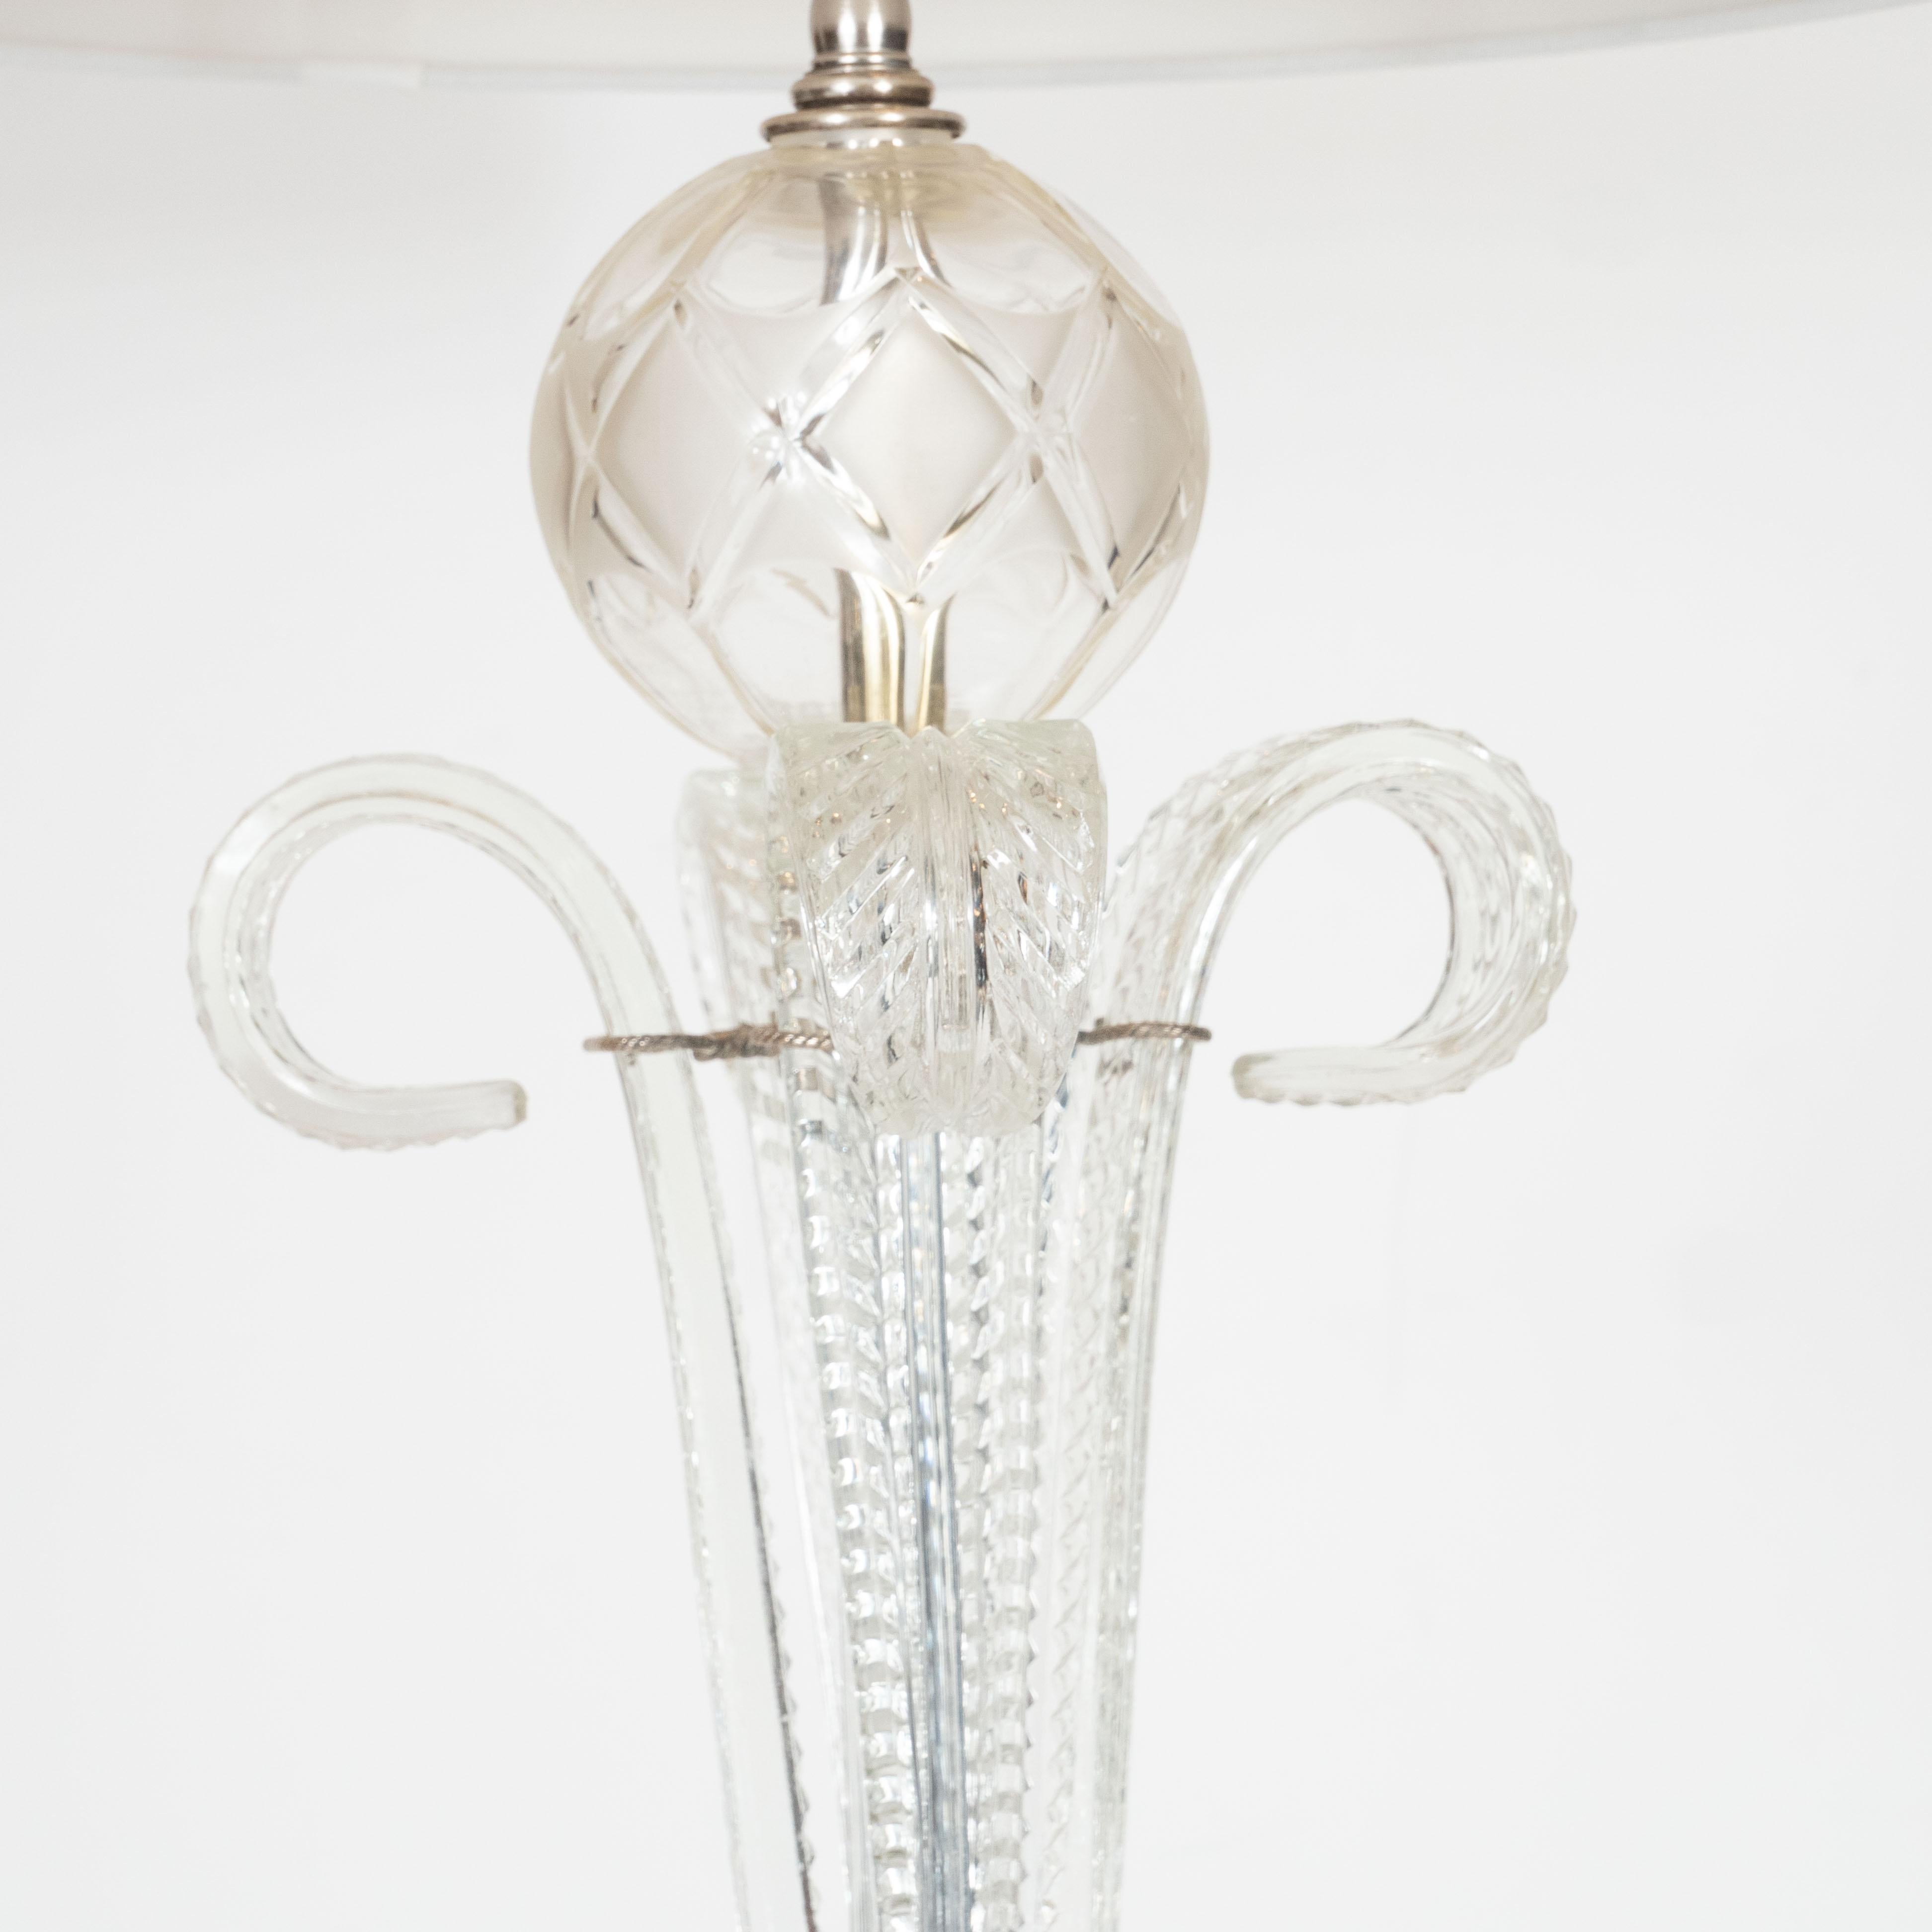 1940s Hollywood Regency Translucent Cut Crystal Table Lamp with Acanthus Details For Sale 2